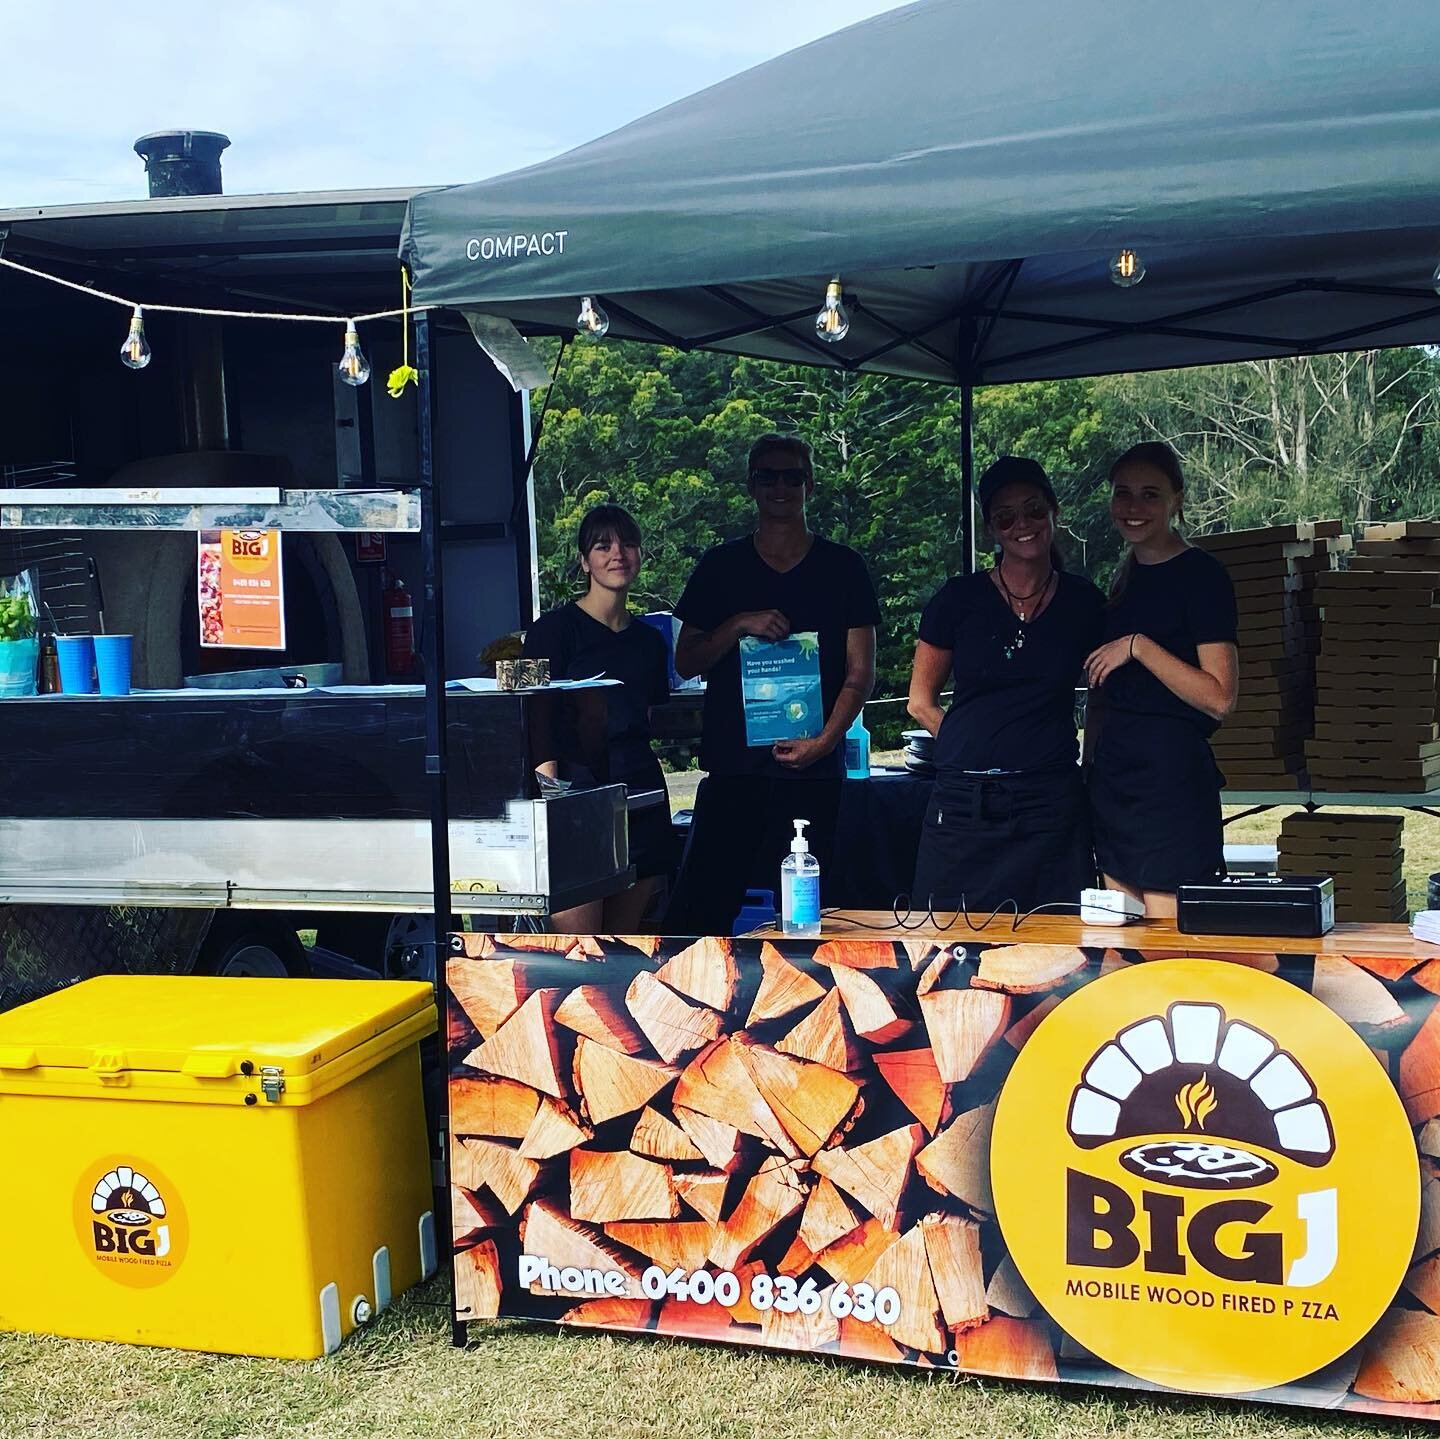 Nambour show day - get down and have a tasty pizza @bigjmobilewoodfiredpizza and an awesome cocktail or ginger beer @diablocoaus